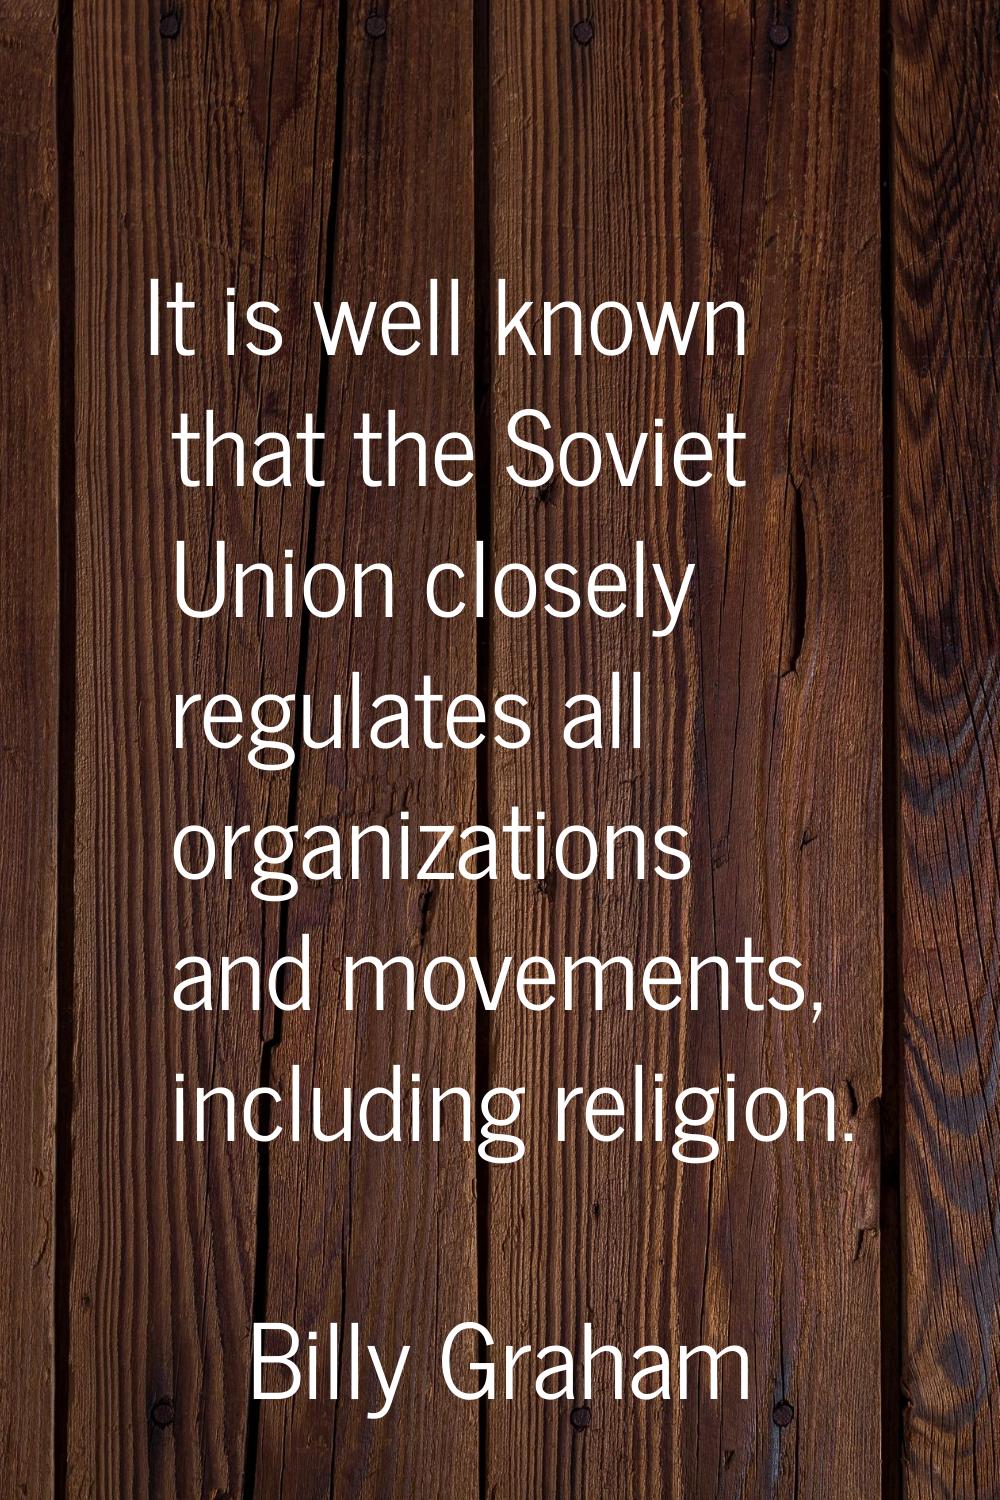 It is well known that the Soviet Union closely regulates all organizations and movements, including